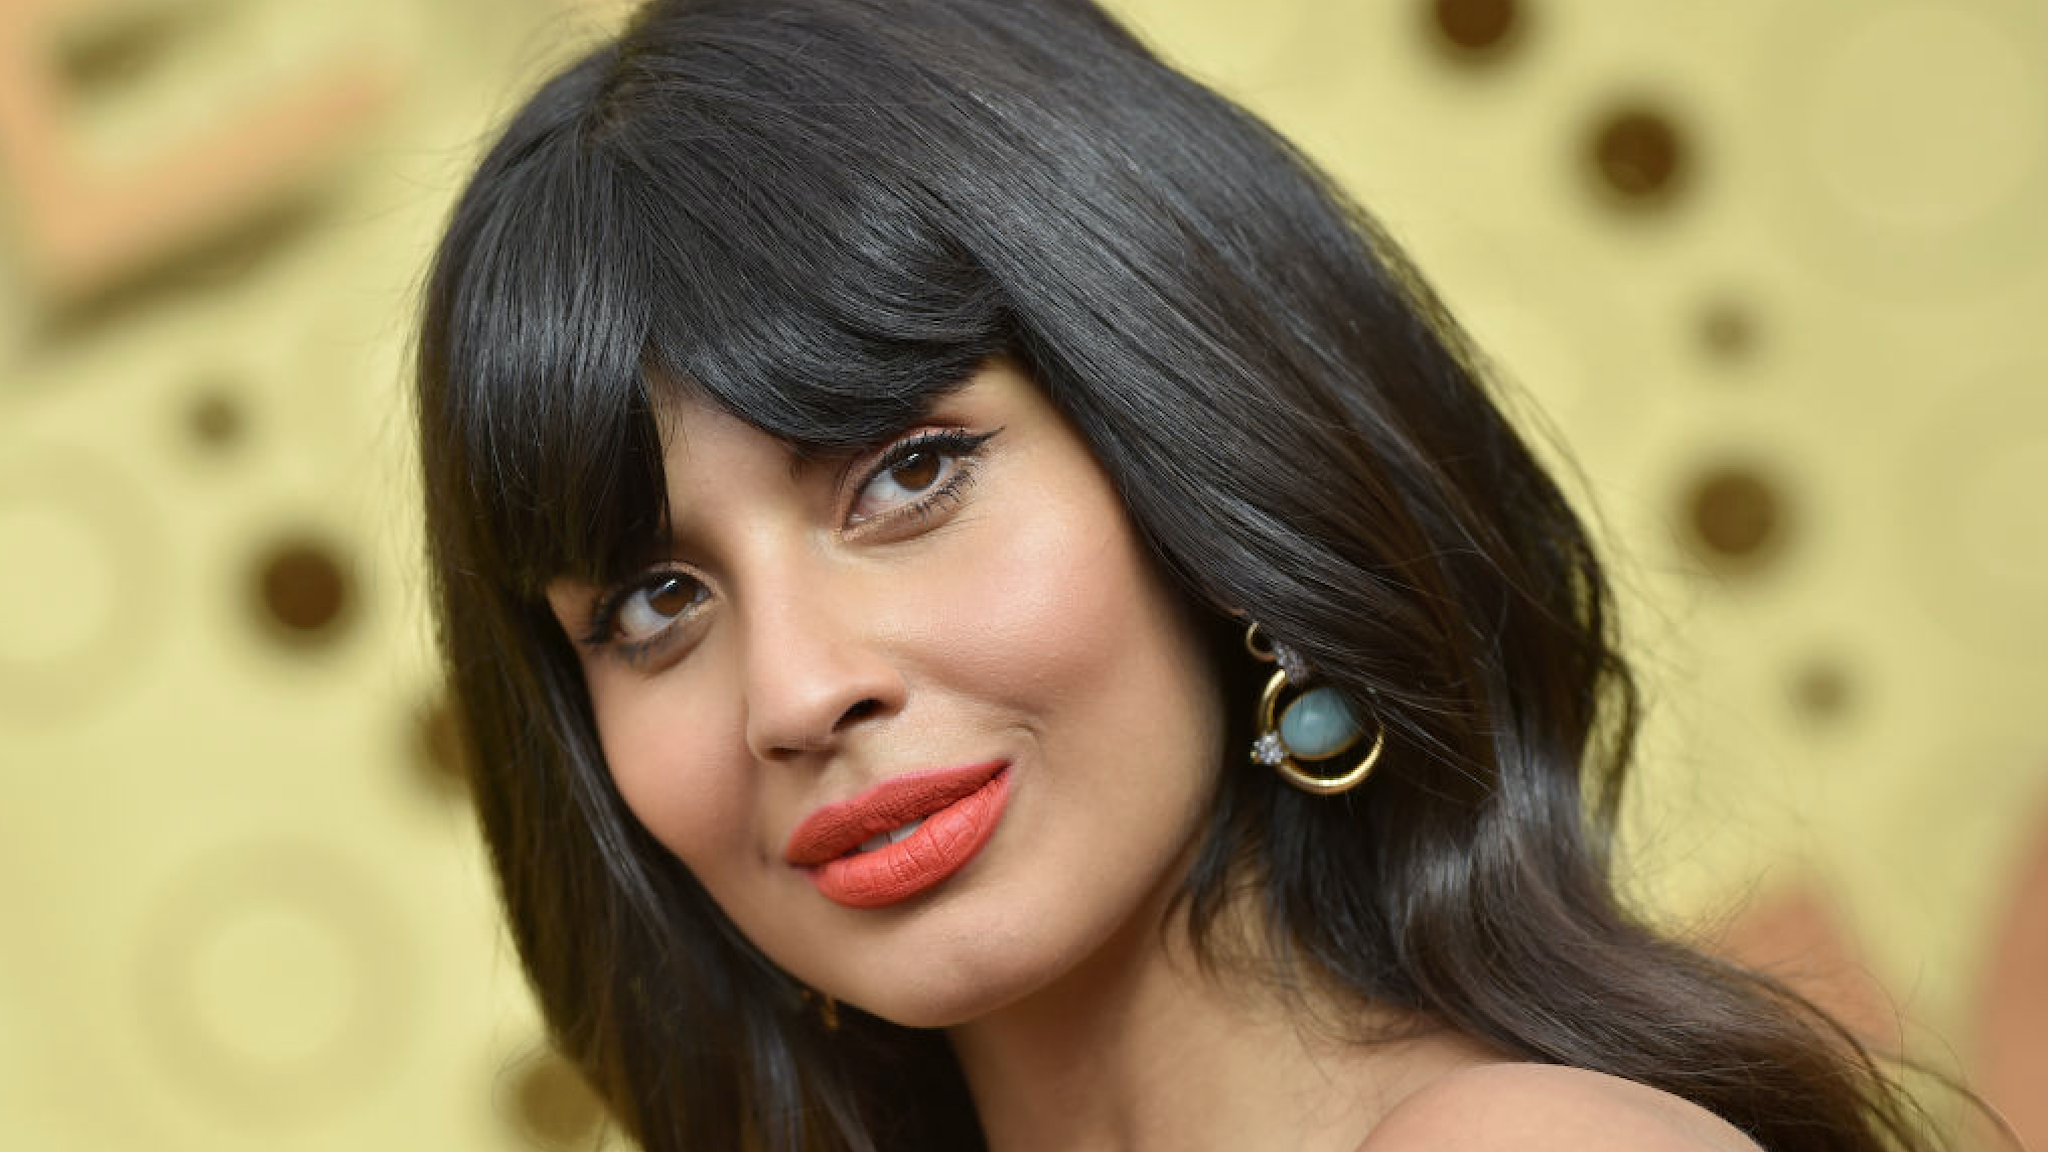 Jameela Jamil attends the 71st Emmy Awards at Microsoft Theater on September 22, 2019 in Los Angeles, California.